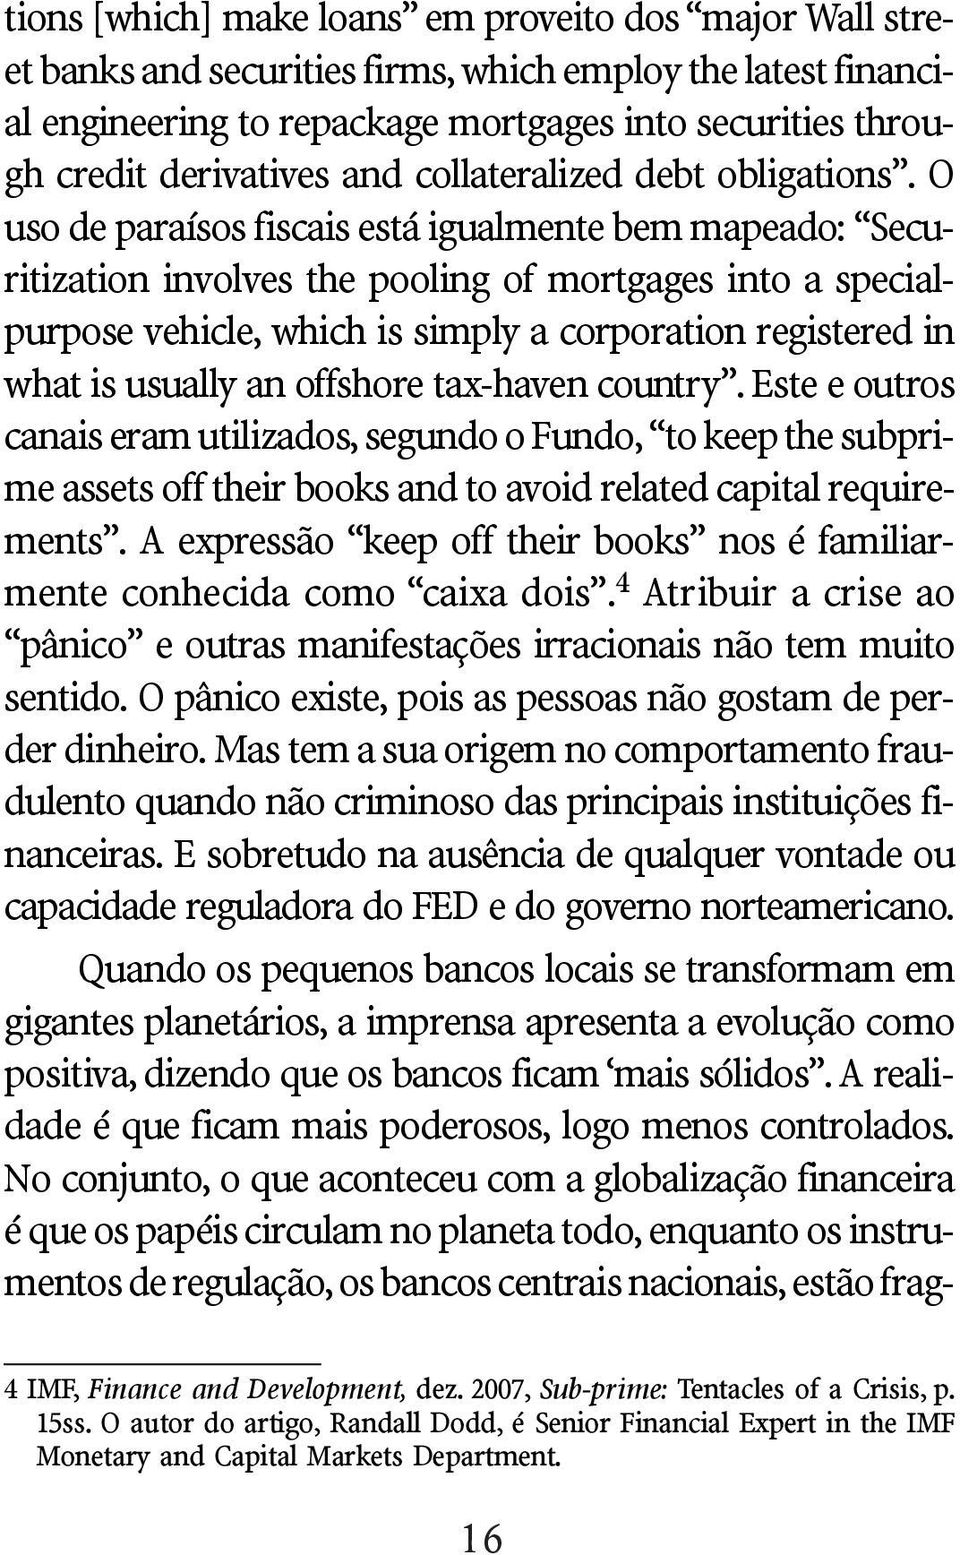 O uso de paraísos fiscais está igualmente bem mapeado: Securitization involves the pooling of mortgages into a specialpurpose vehicle, which is simply a corporation registered in what is usually an